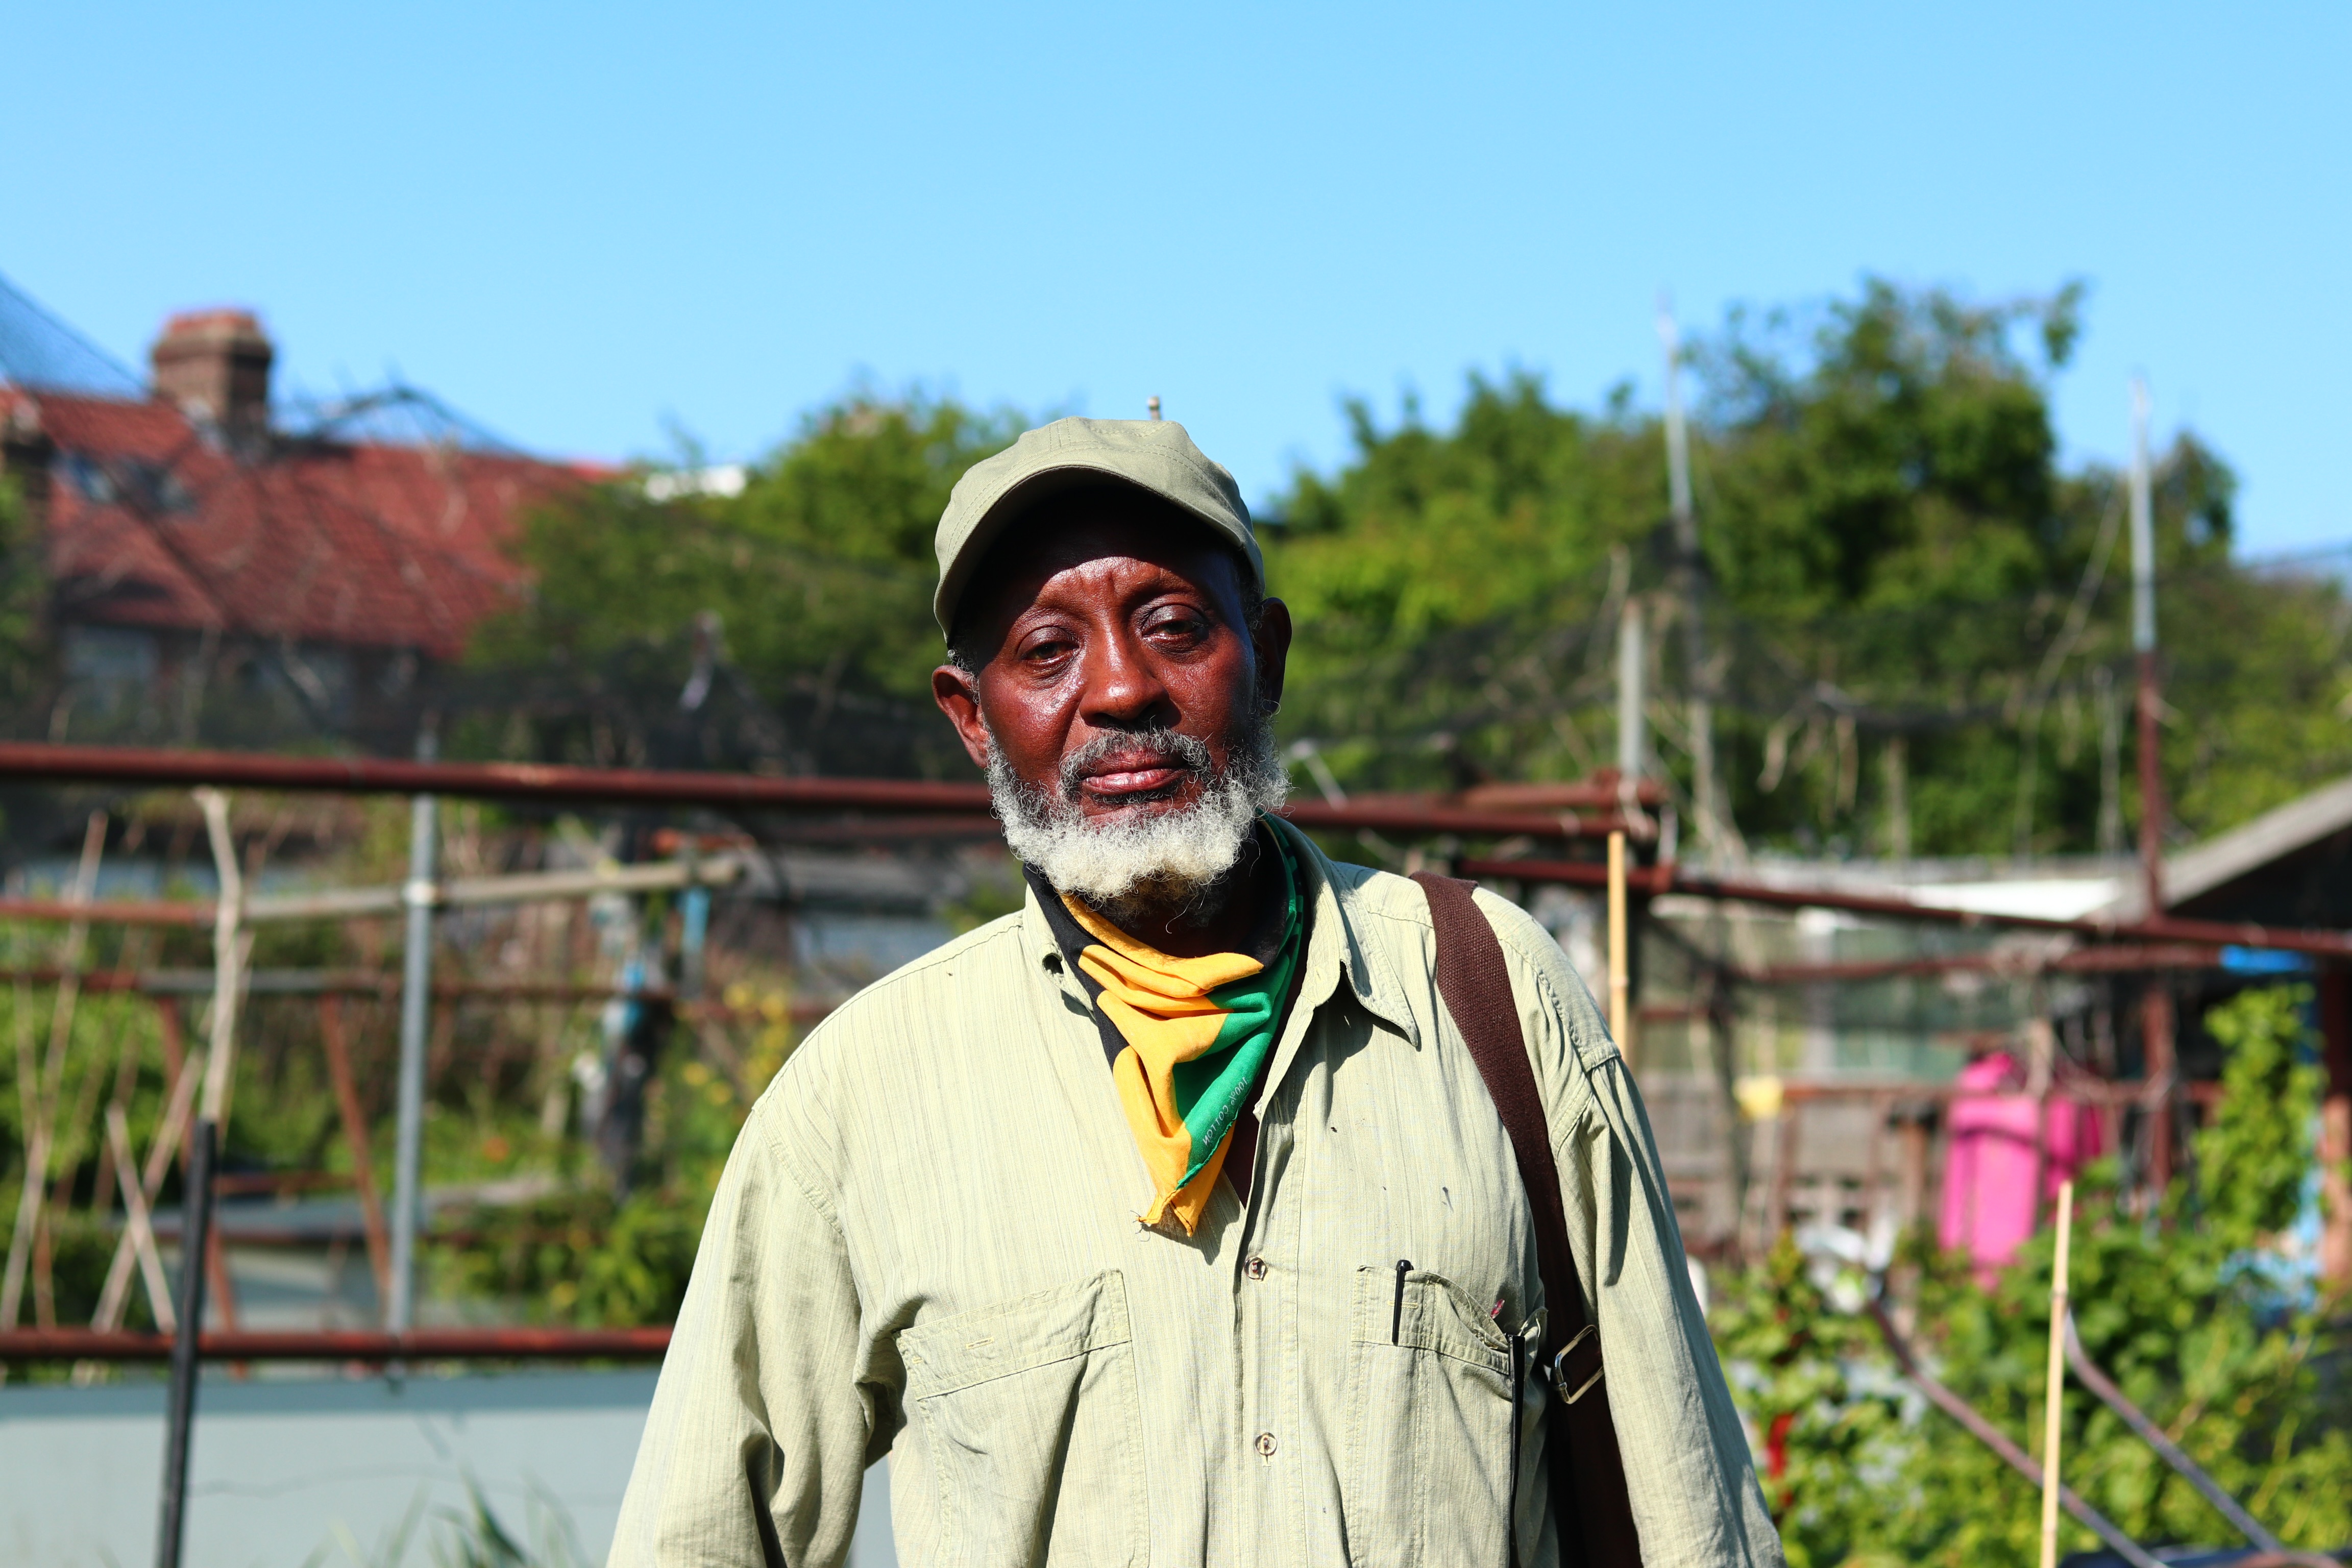 Robbie Samuda is a balck gardener looking at the camera. He is standing in an allotment wearing a khaki cap and shirt and a Jamaica flag balaclava. The sky is blue.